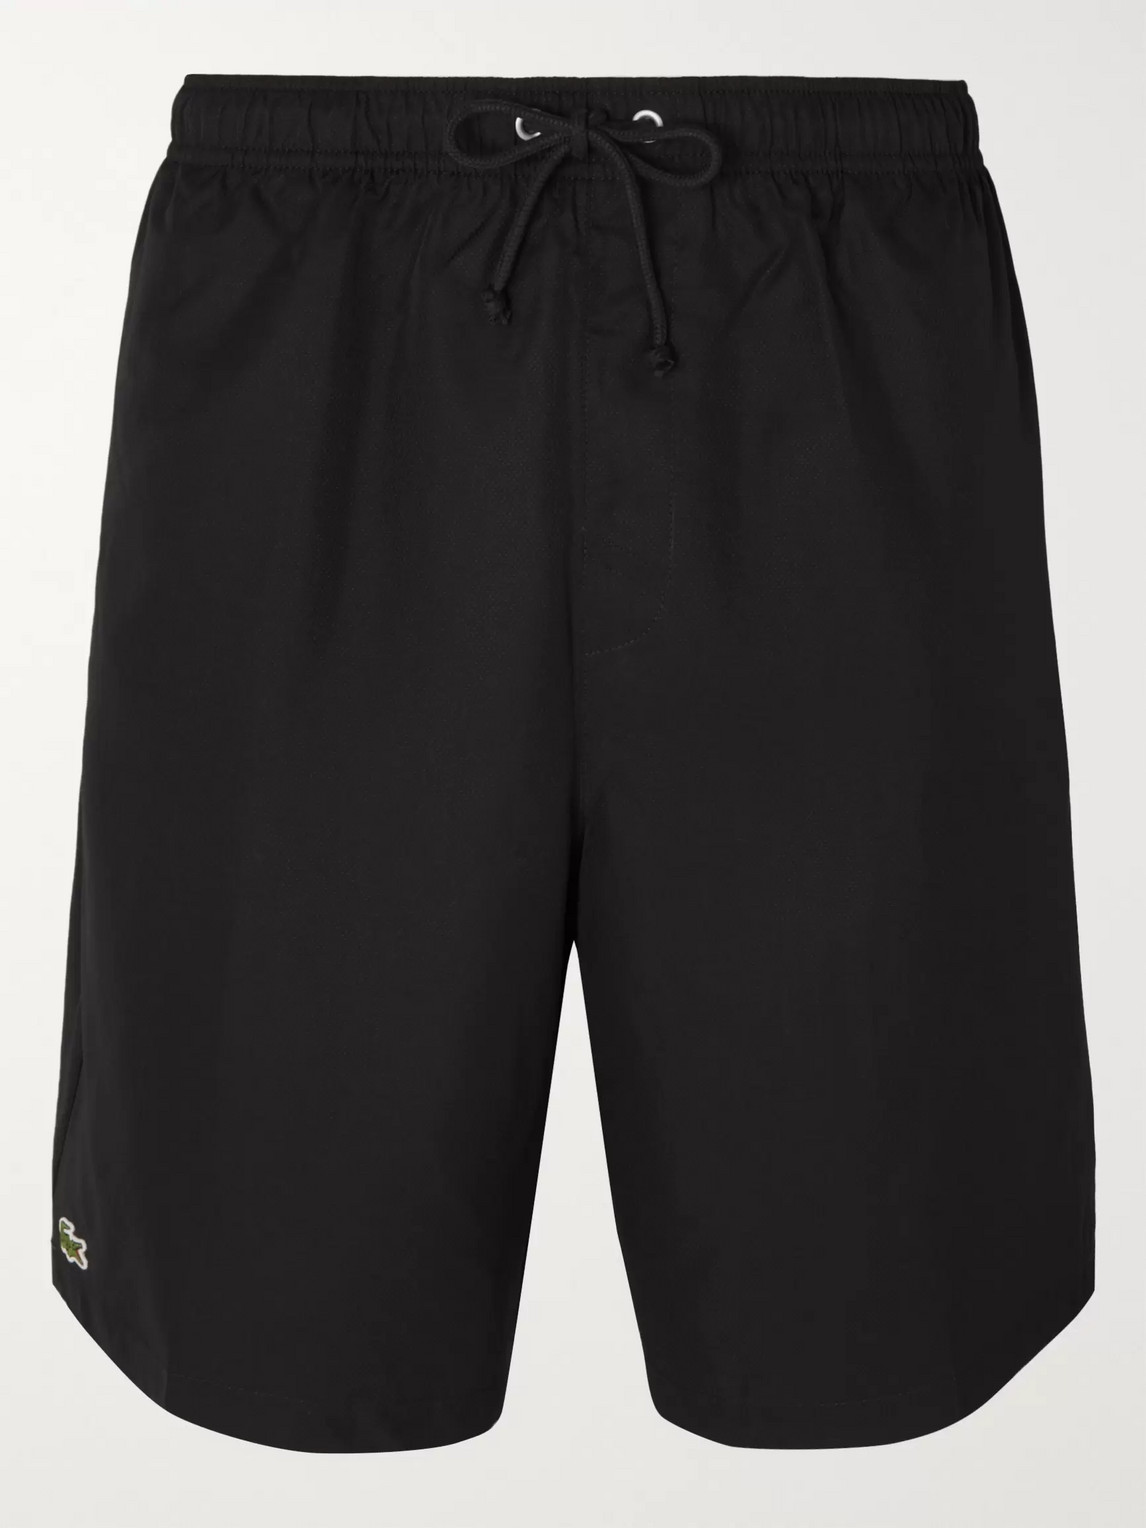 Lacoste Tennis Shell Tennis Shorts In Black